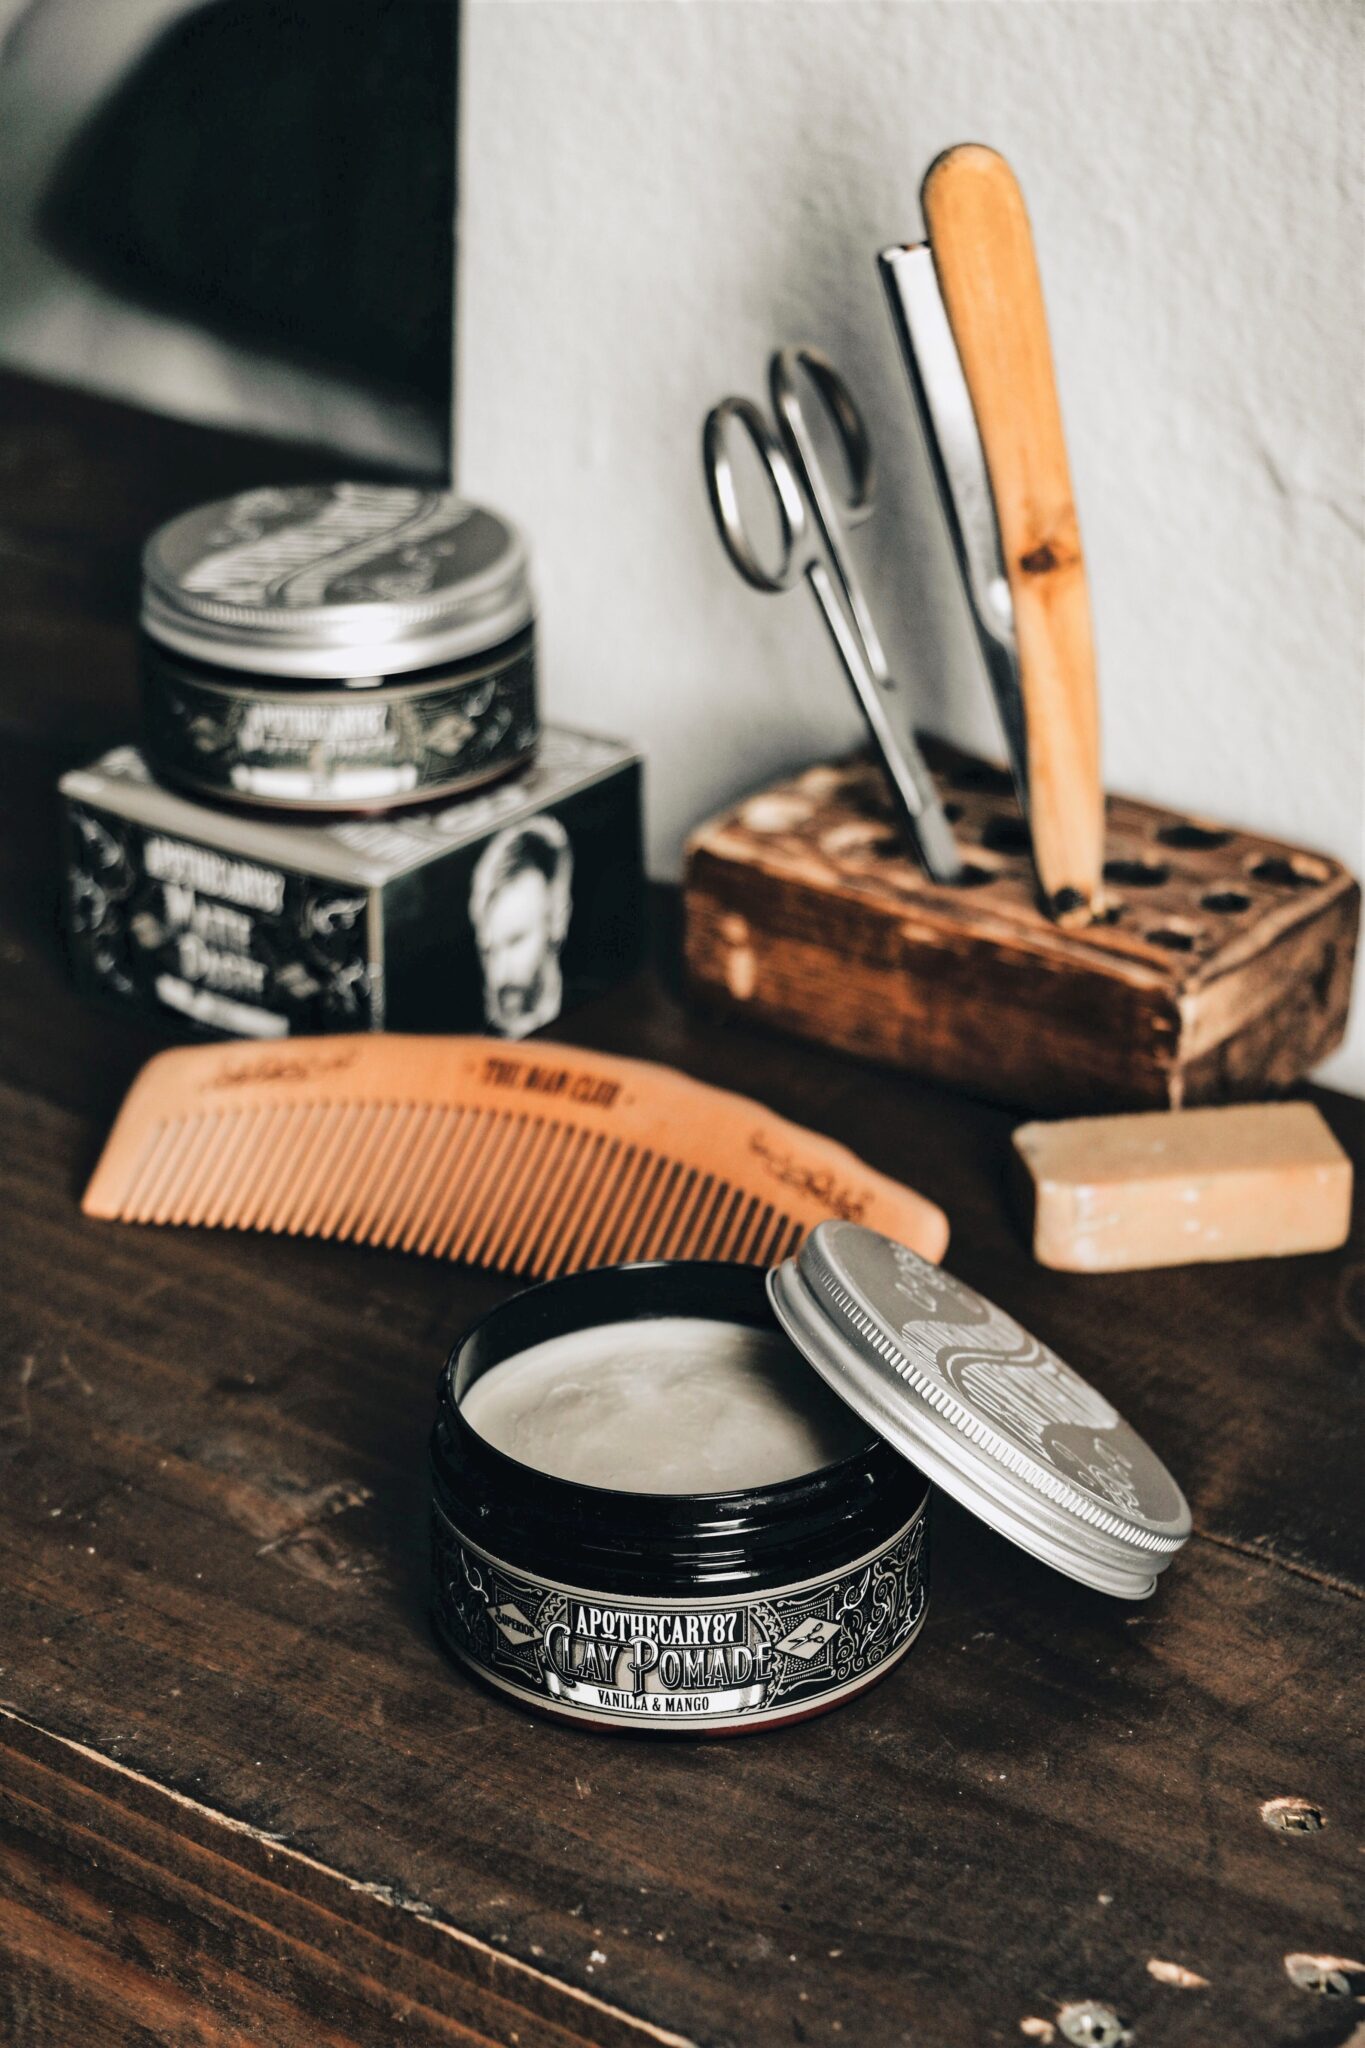 Tools of a barber are shown on a wooden table. Thera are scissors, pomade, brushes, and more. This article covers useful tips for choosing a barber. 